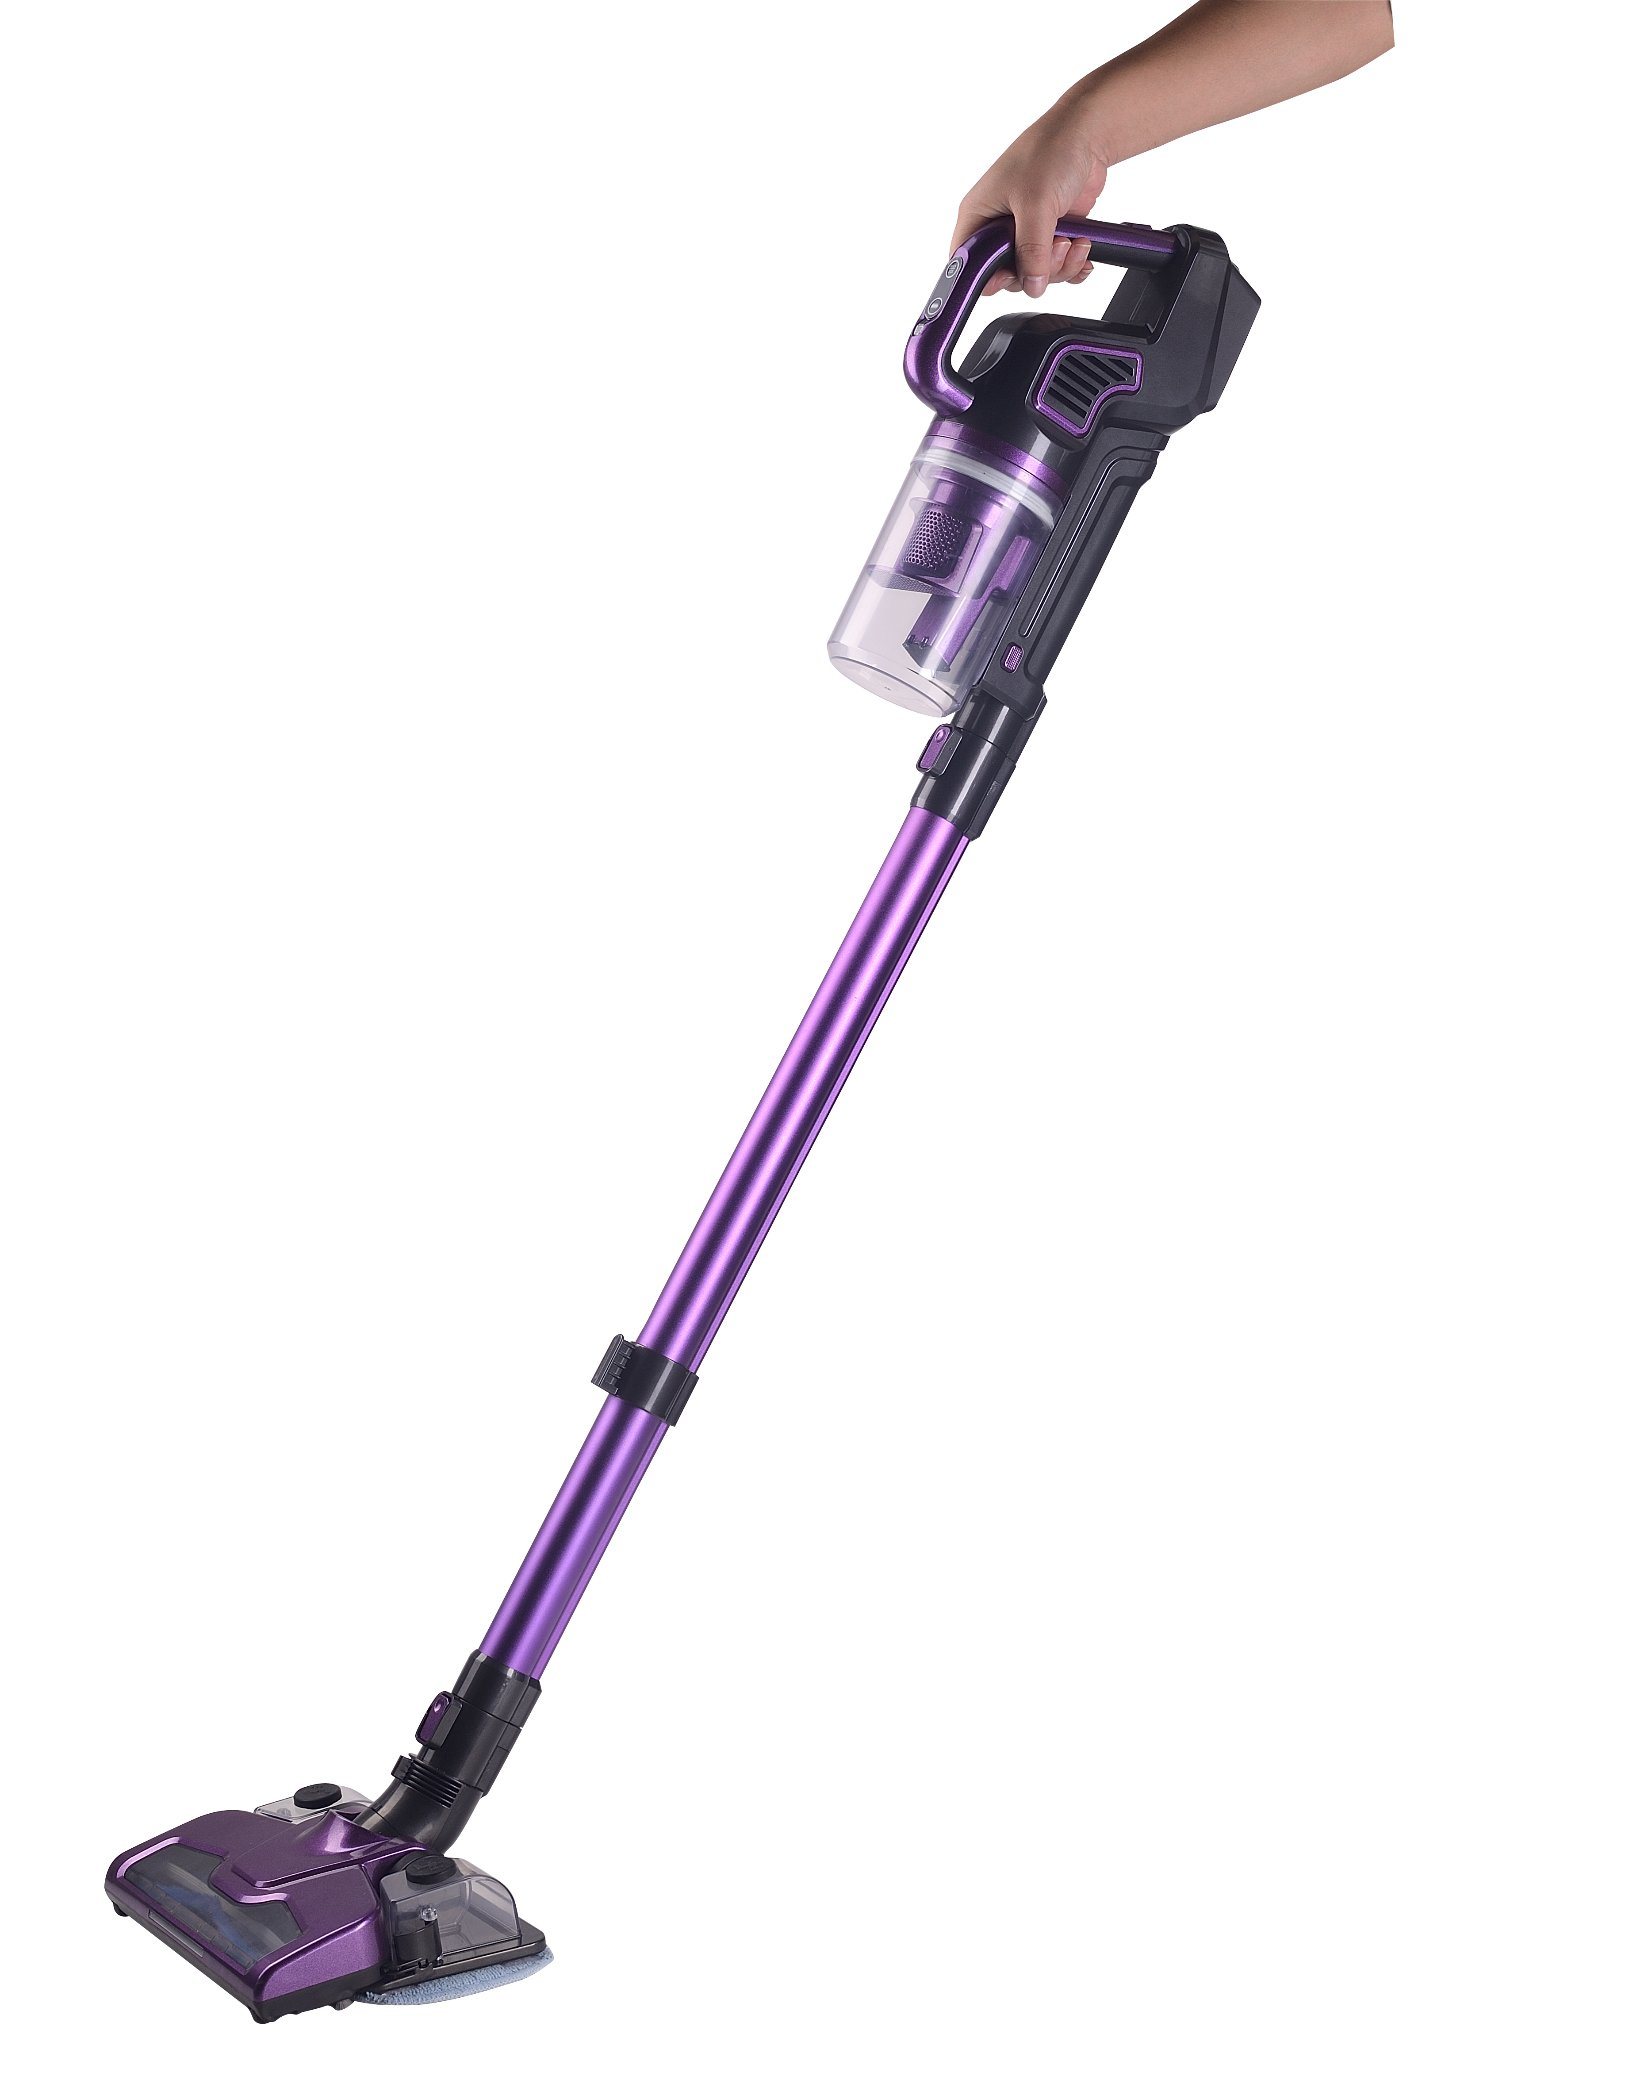 Cordless-Lithium-Battery-Stick-Handle-with-Mop-Function-Vacuum-Cleaner (1)